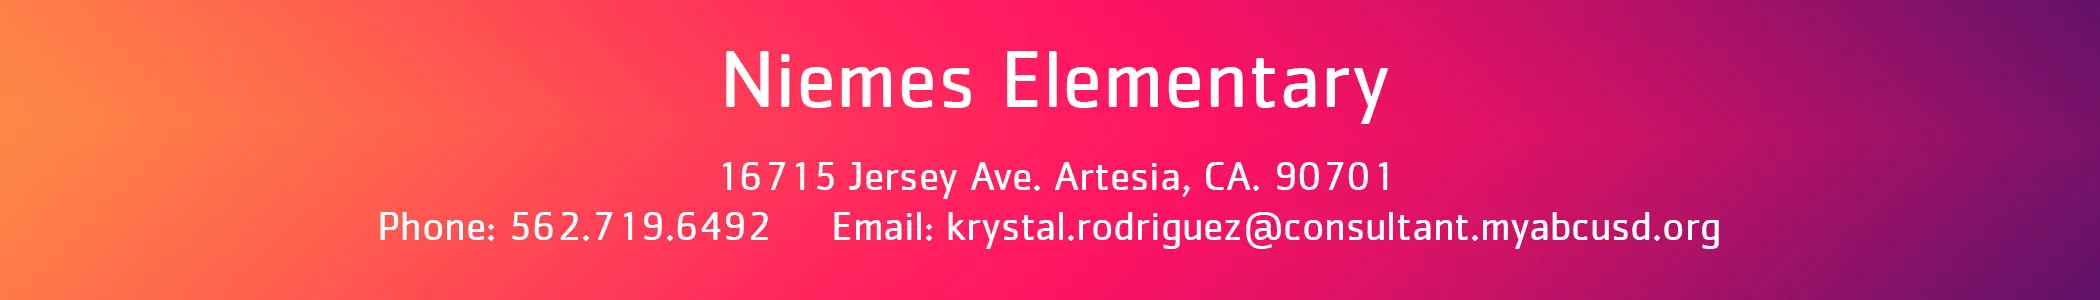 niemes banner with site information